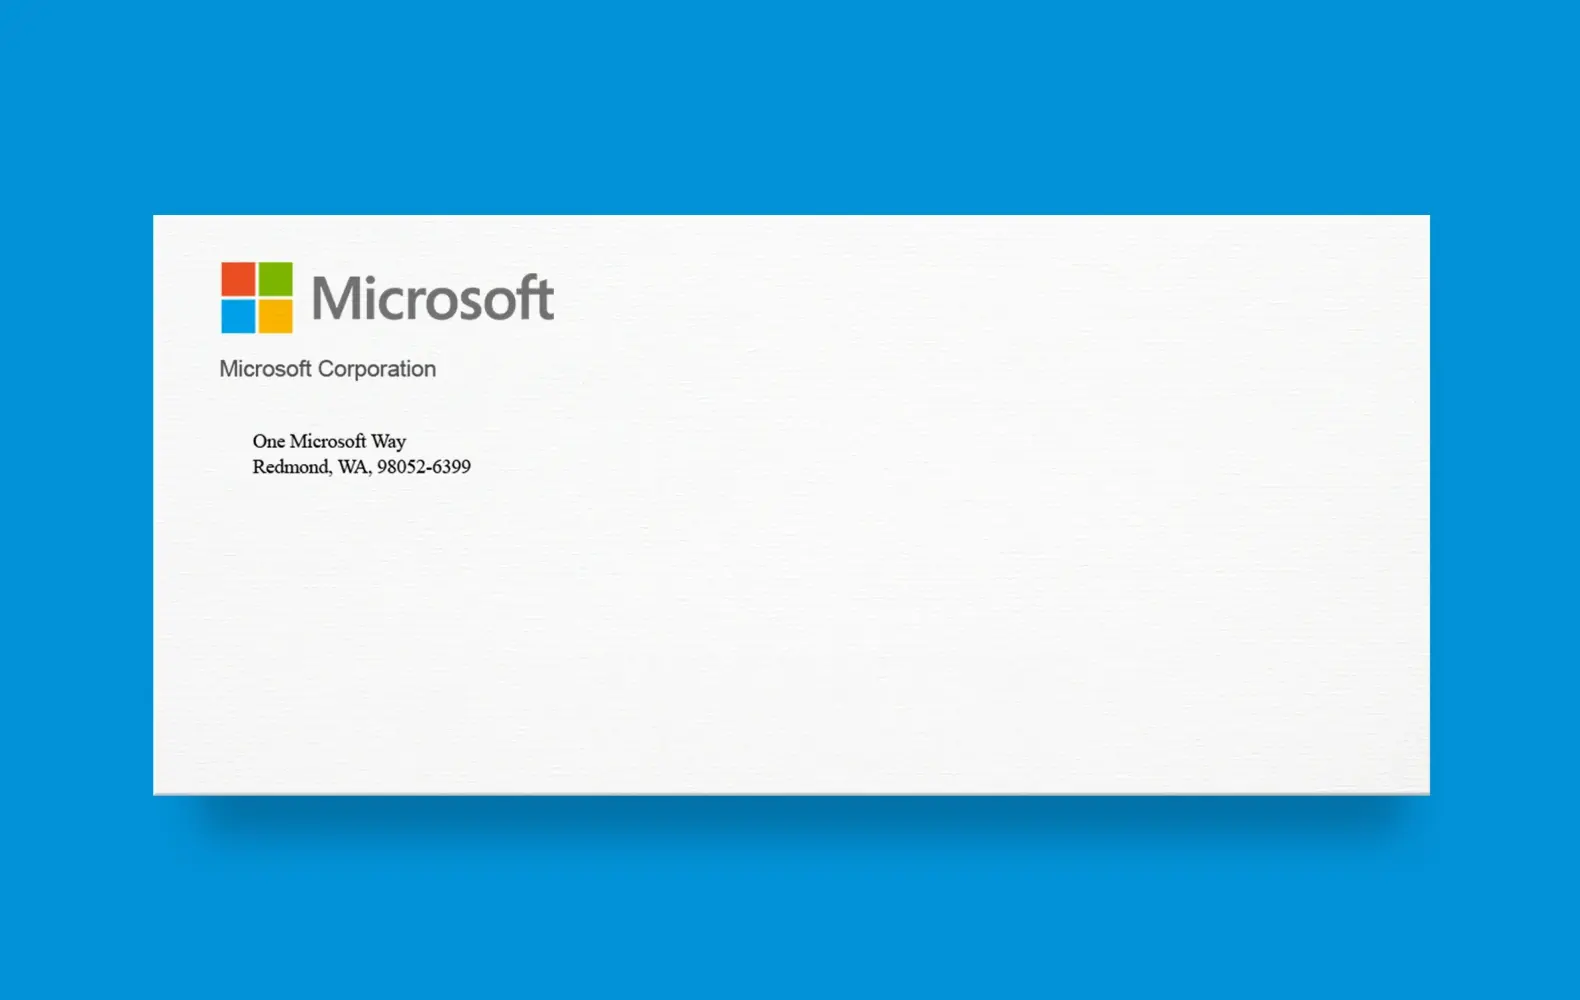 An envelope branded with the Microsoft logo, name, and address.